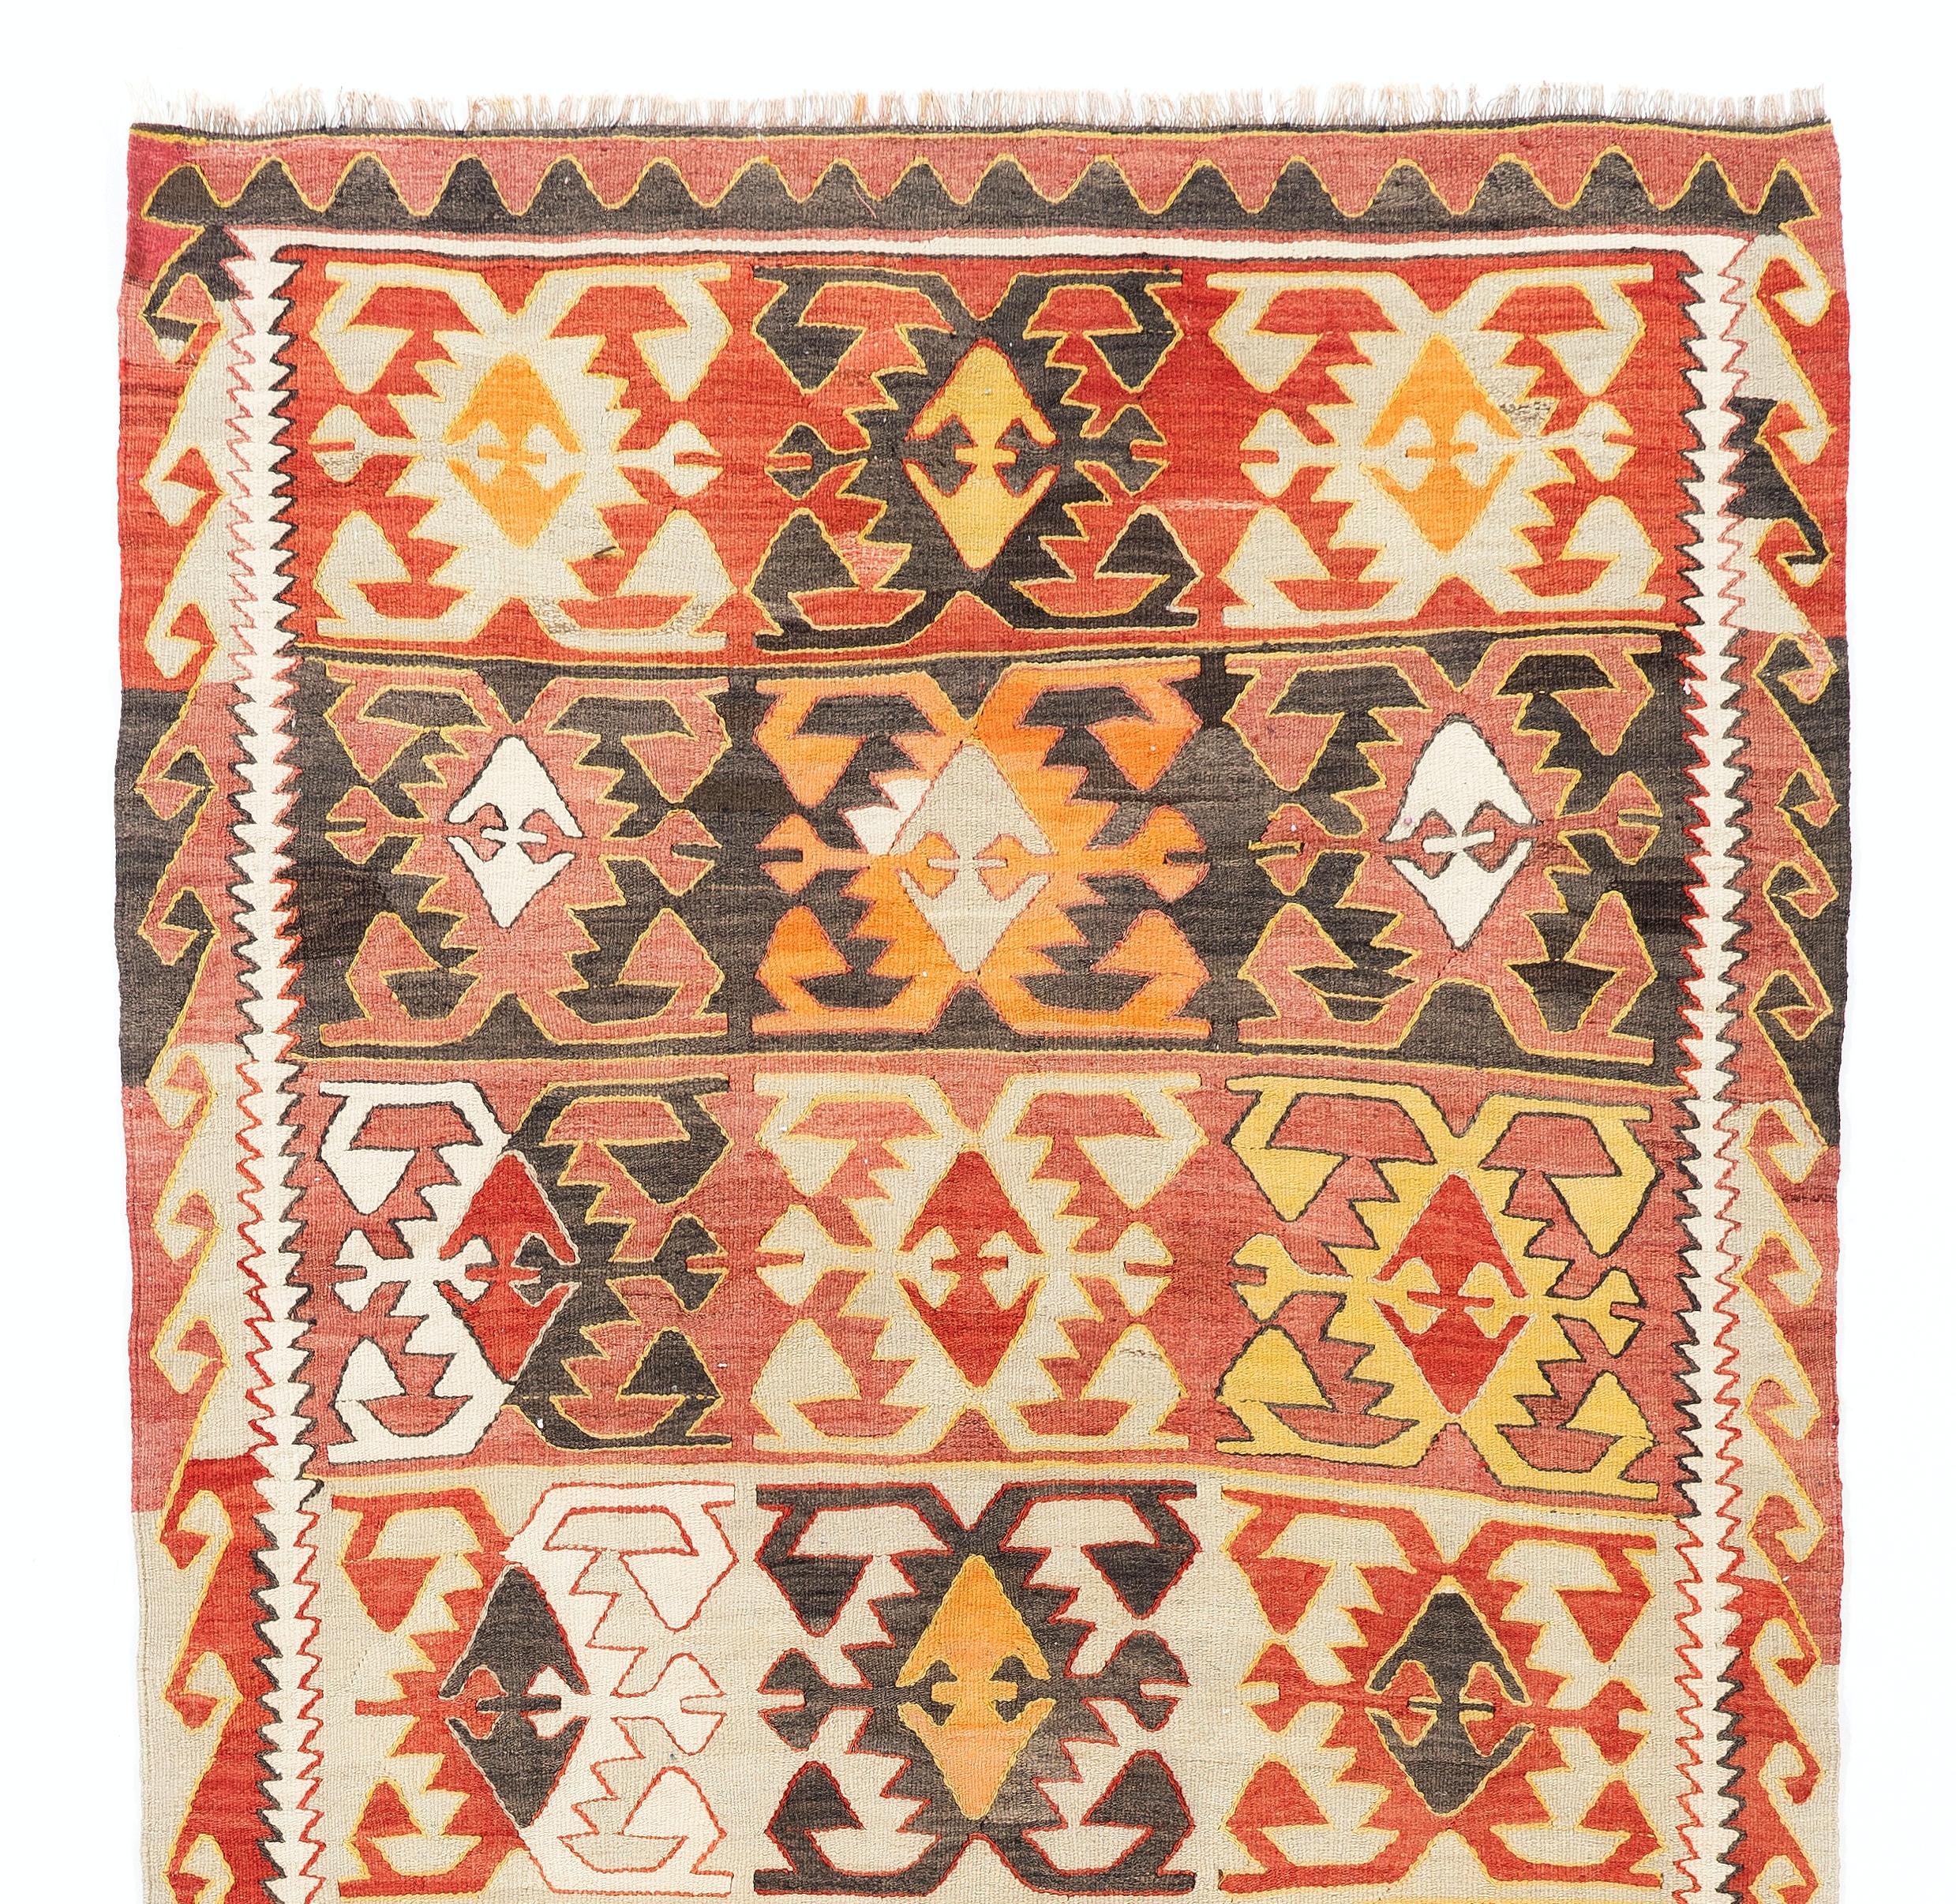 A vintage Central Anatolian Kilim (flat-woven rug) in a very warm, sun kissed color palette of terra cotta red, tomato red, burnt orange, bright orange, yellow, ivory as well as brown and very light aqua green. It features a unique design of